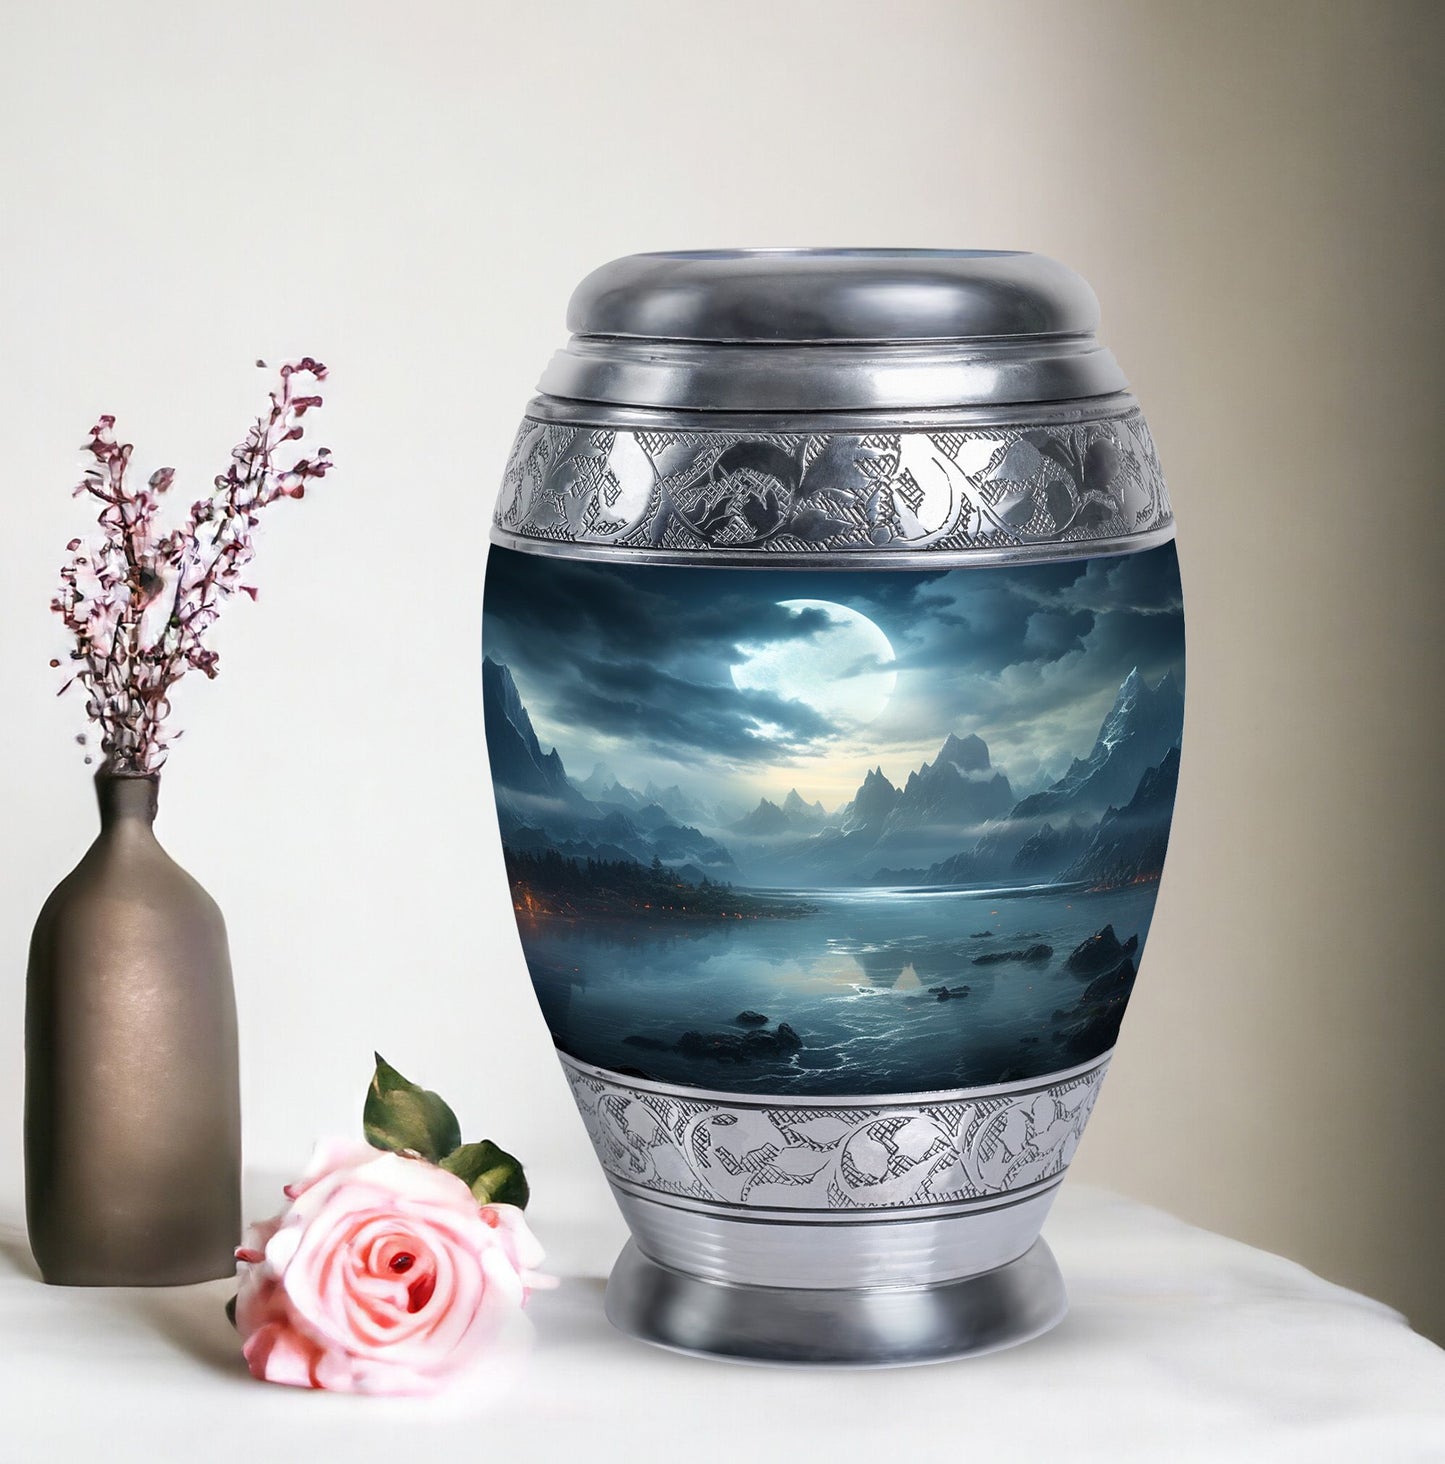 Moonlit Monar Urn, a large metal cremation urn, customizable with engraved names, has capacity for 200 cubic inches of ashes